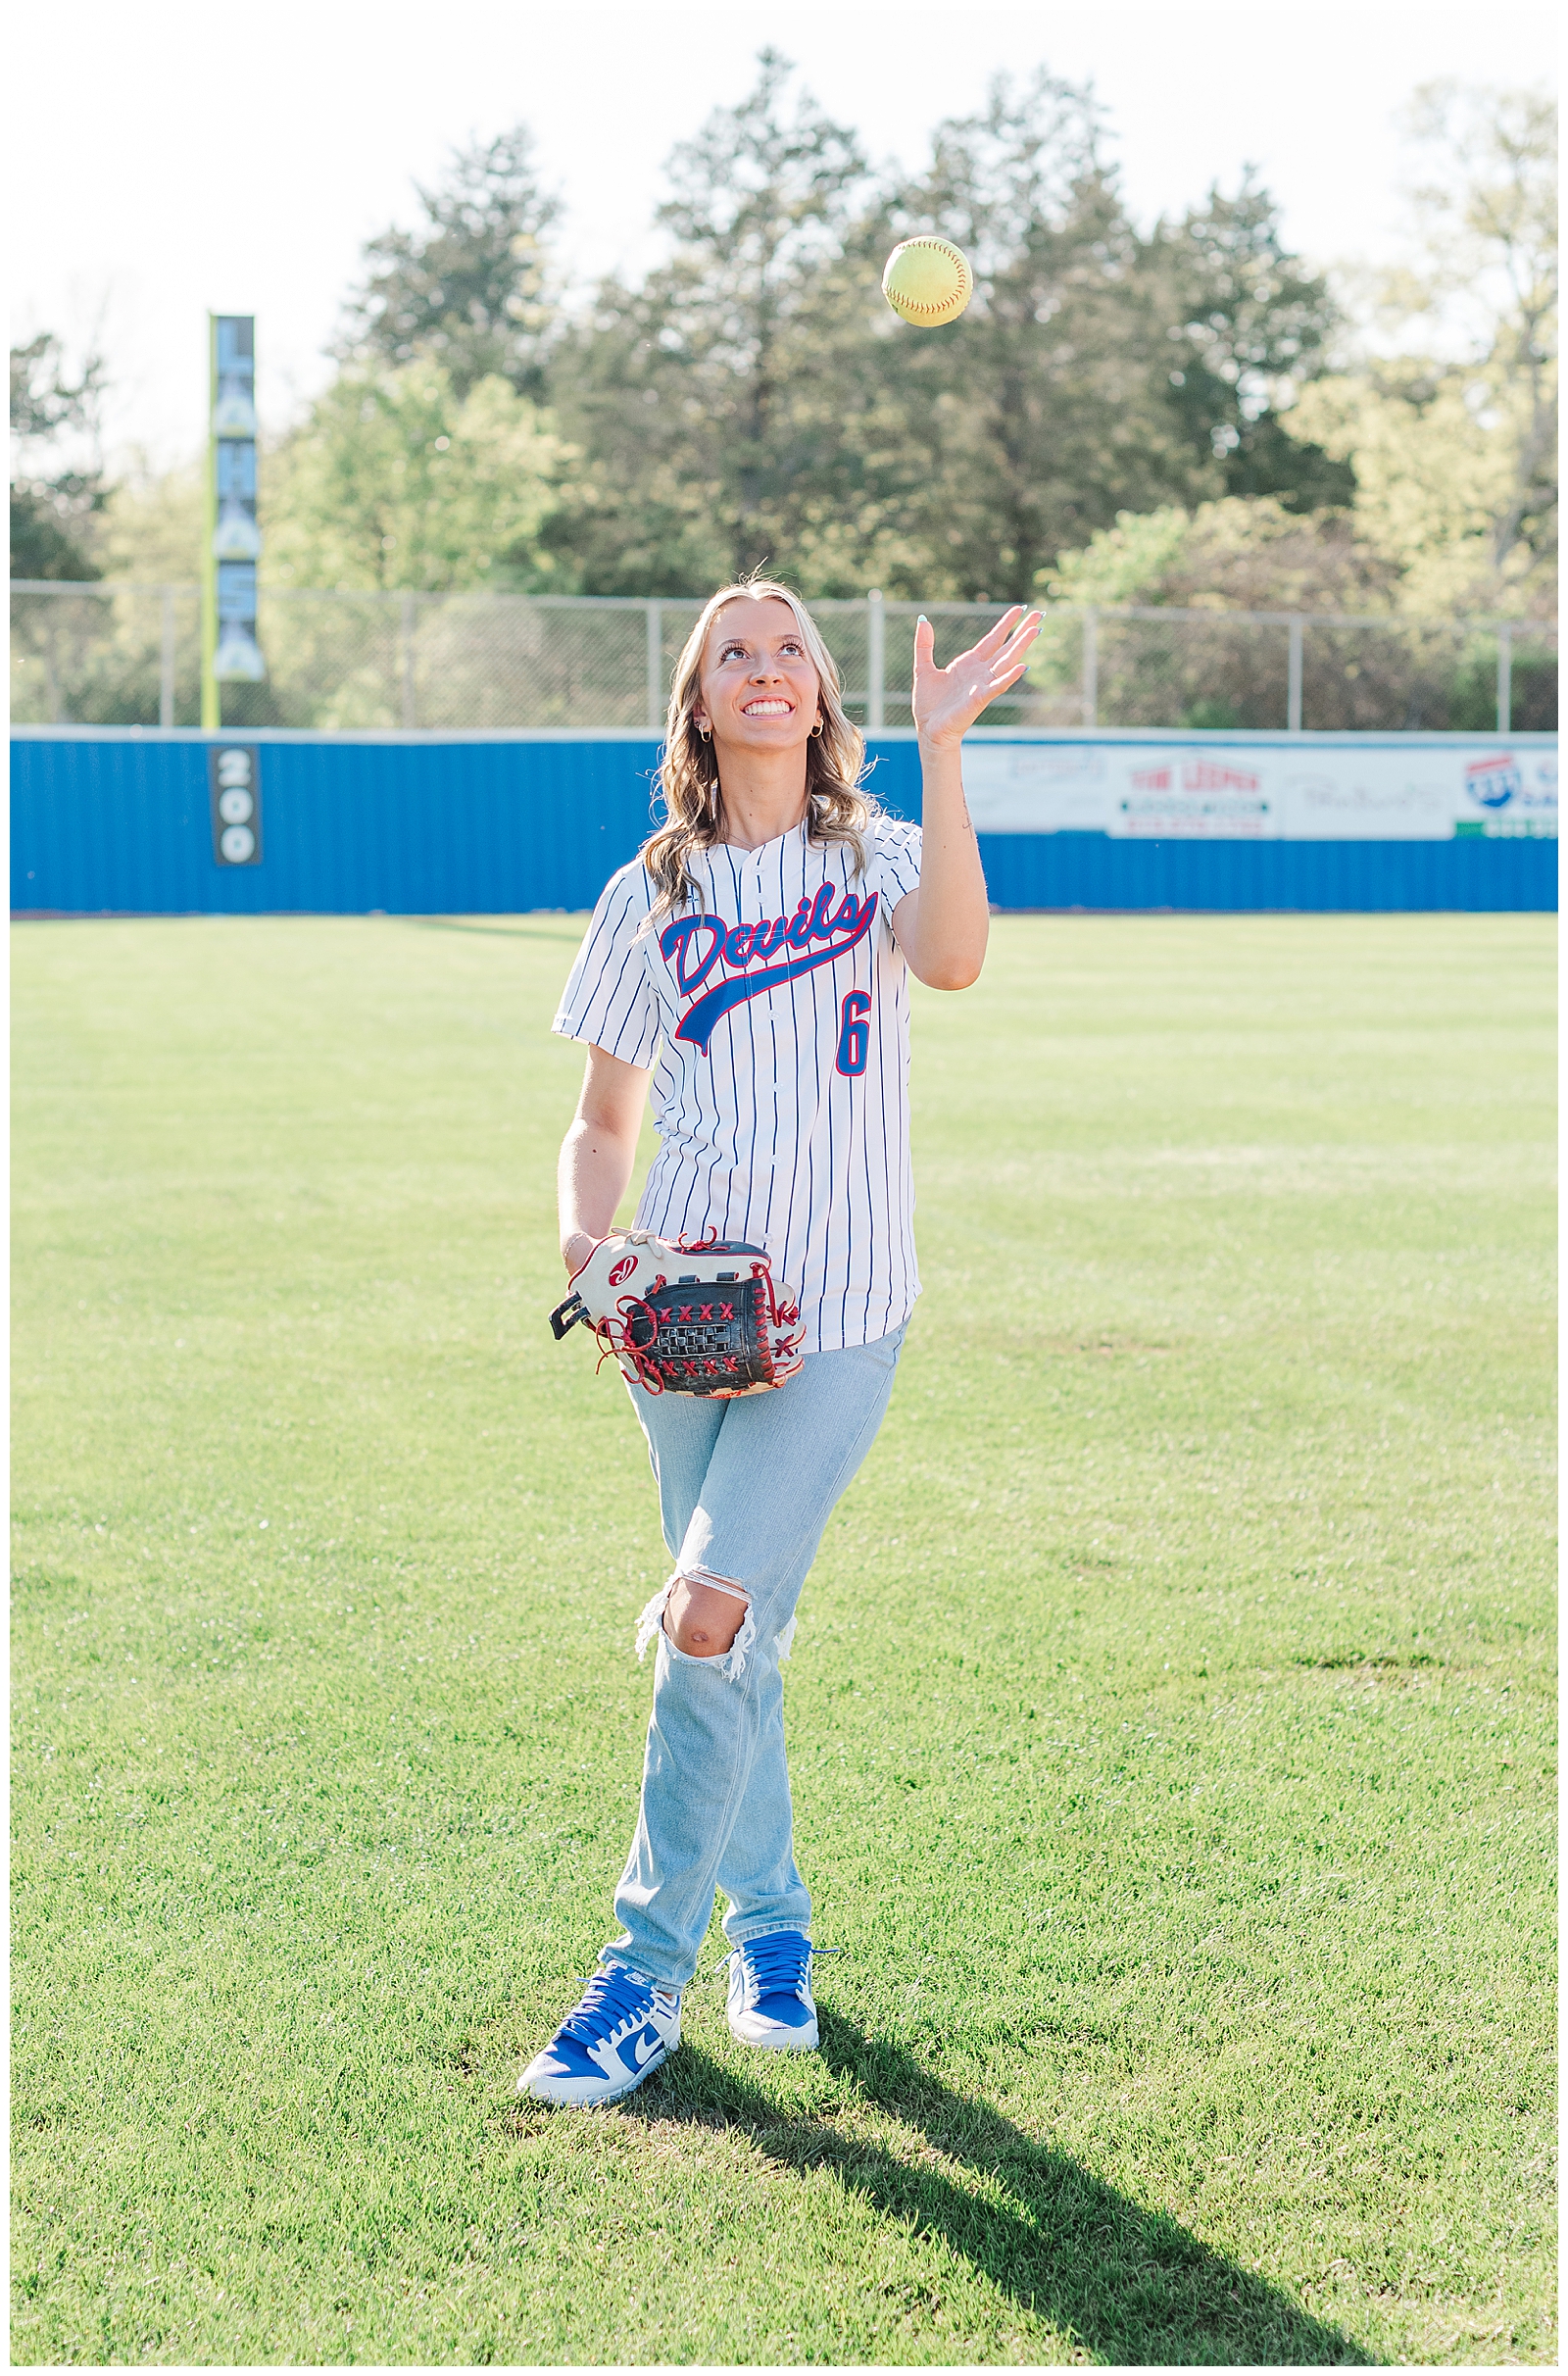 Senior girl tossing up a softball on the field at her high school softball field.